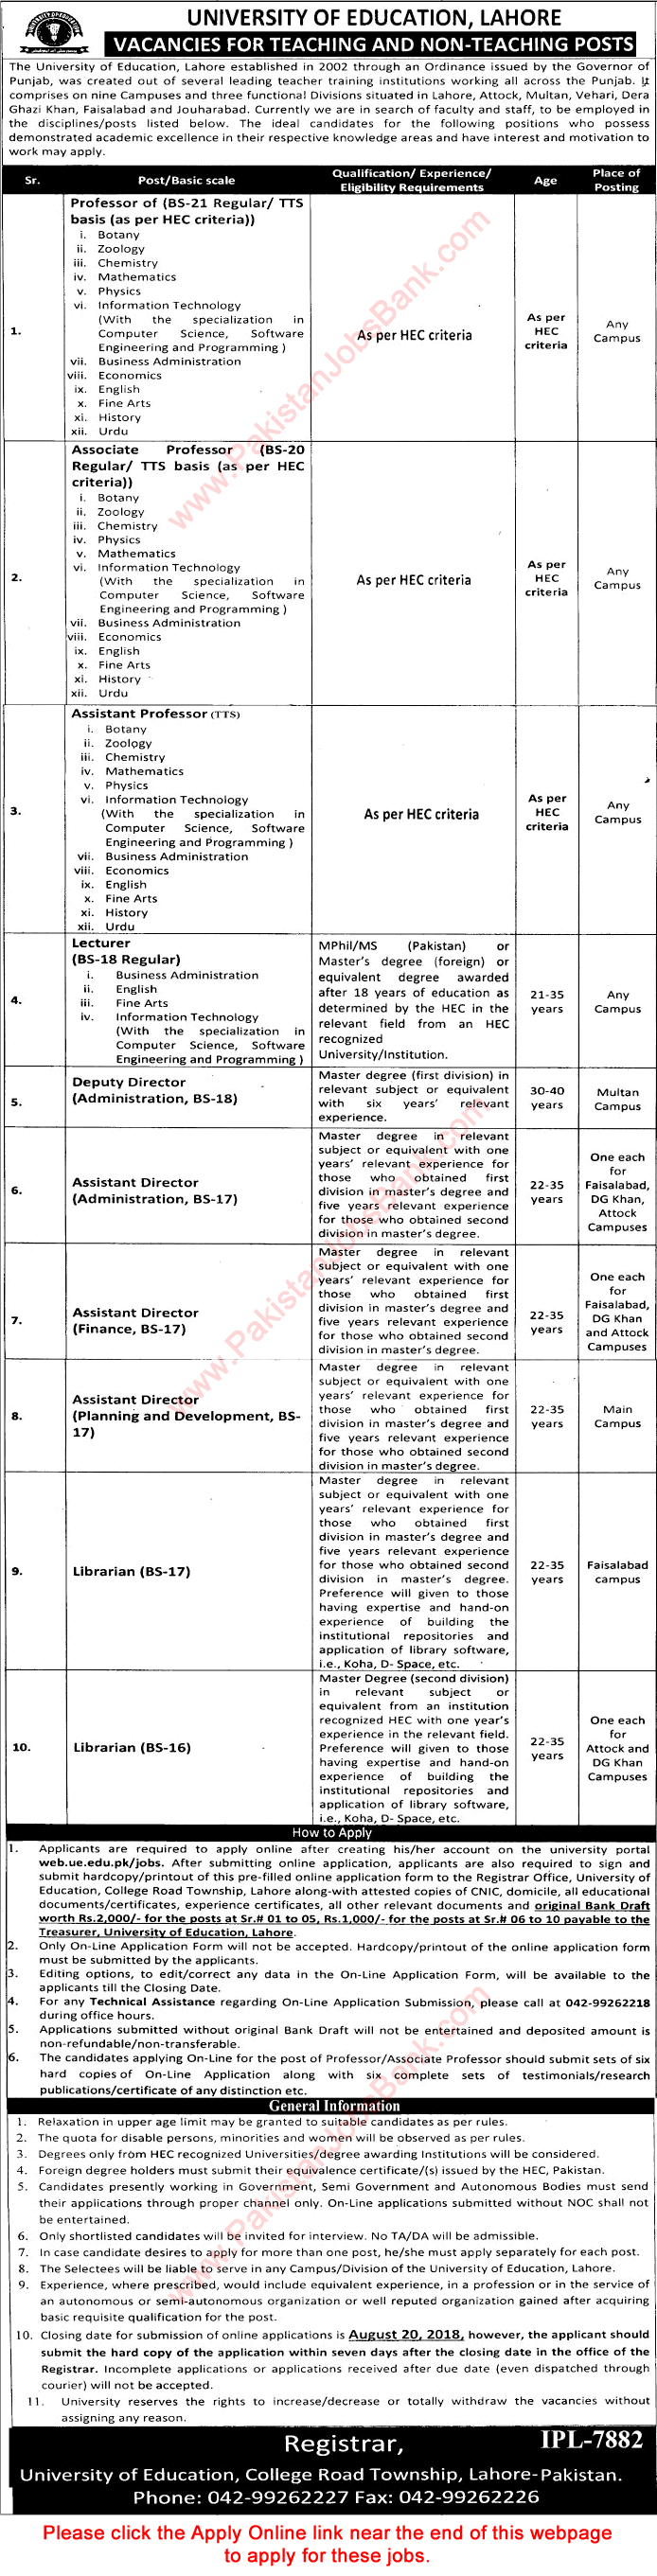 University of Education Lahore Jobs August 2018 Apply Online Teaching Faculty & Others Latest